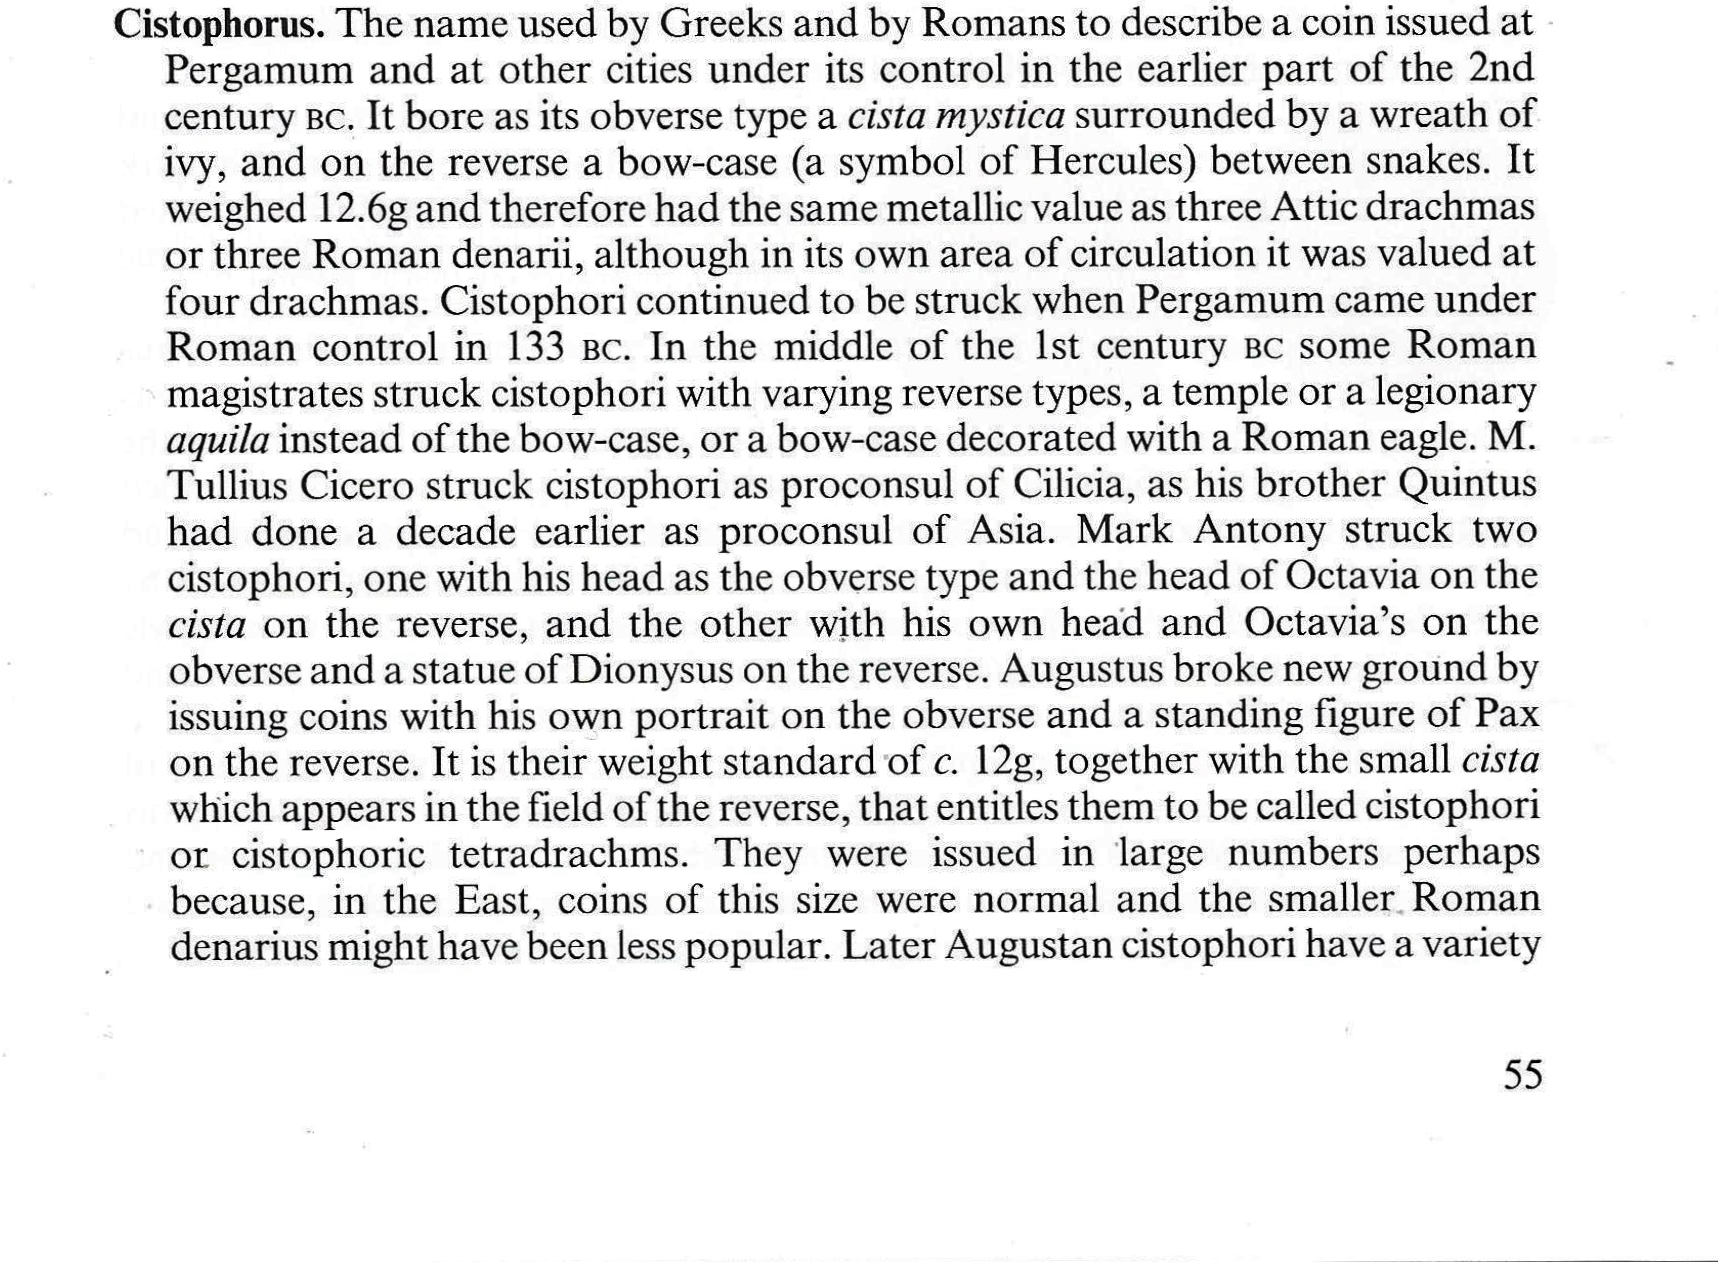 p. 1 -- entry for cistophorus in Dictionary of Ancient Roman Coins.jpg